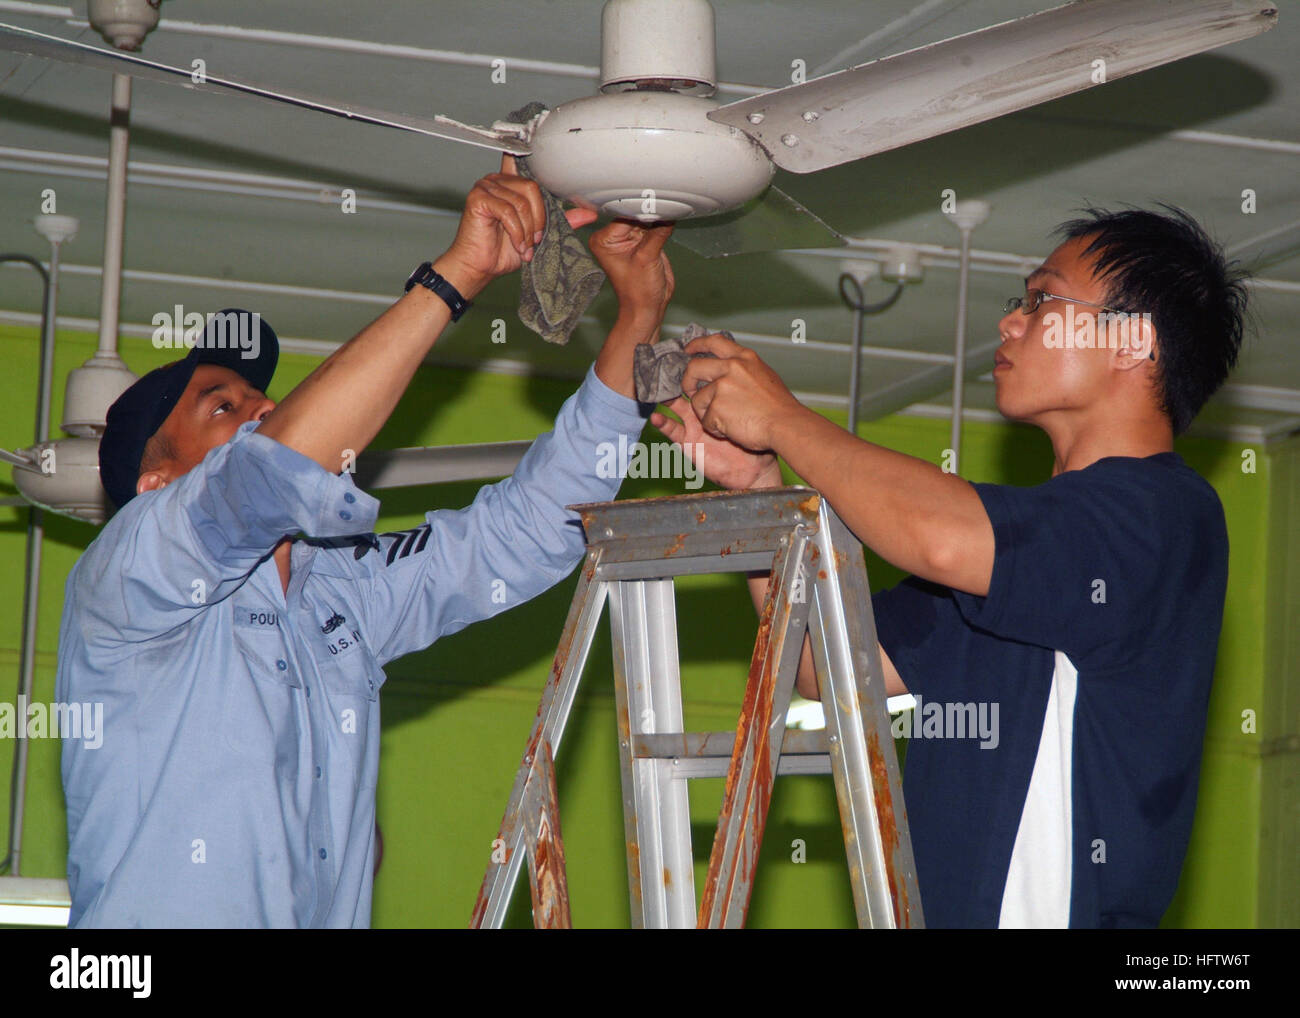 070719-N-0120A-042  SINGAPORE (July 19, 2007) - Dock landing ship USS Harpers Ferry (LSD 49) Sailor and a Singapore navy sailor work together cleaning fans at a Movement for the Intellectually Disabled of Singapore (MINDS) training and development center. This community interaction project is part of the Singapore stage of Cooperation Afloat Readiness and Training (CARAT) 2007. CARAT is an annual series of bilateral maritime training exercises between the United States and six Southeast Asia nations designed to build relationships and enhance the operational readiness of the participating forc Stock Photo